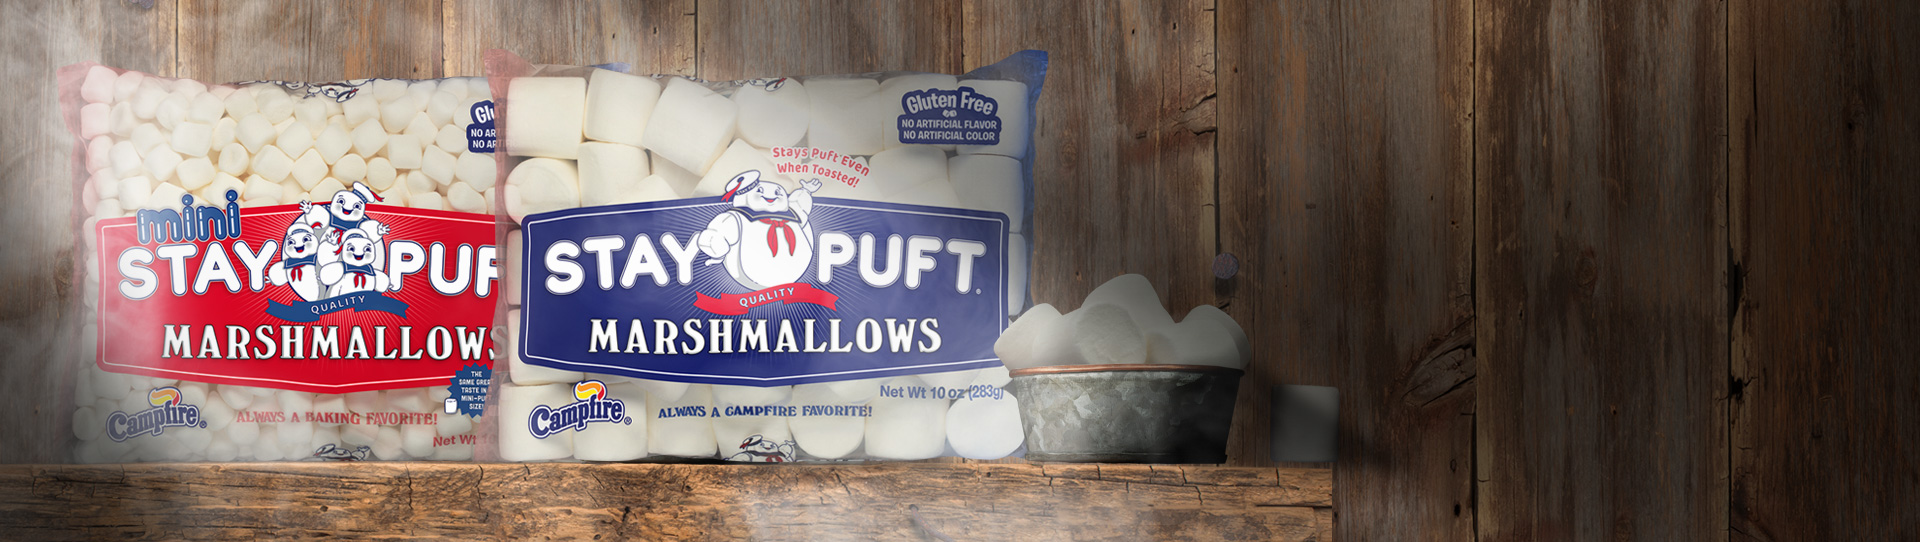 bags of StayPuft marshmallows